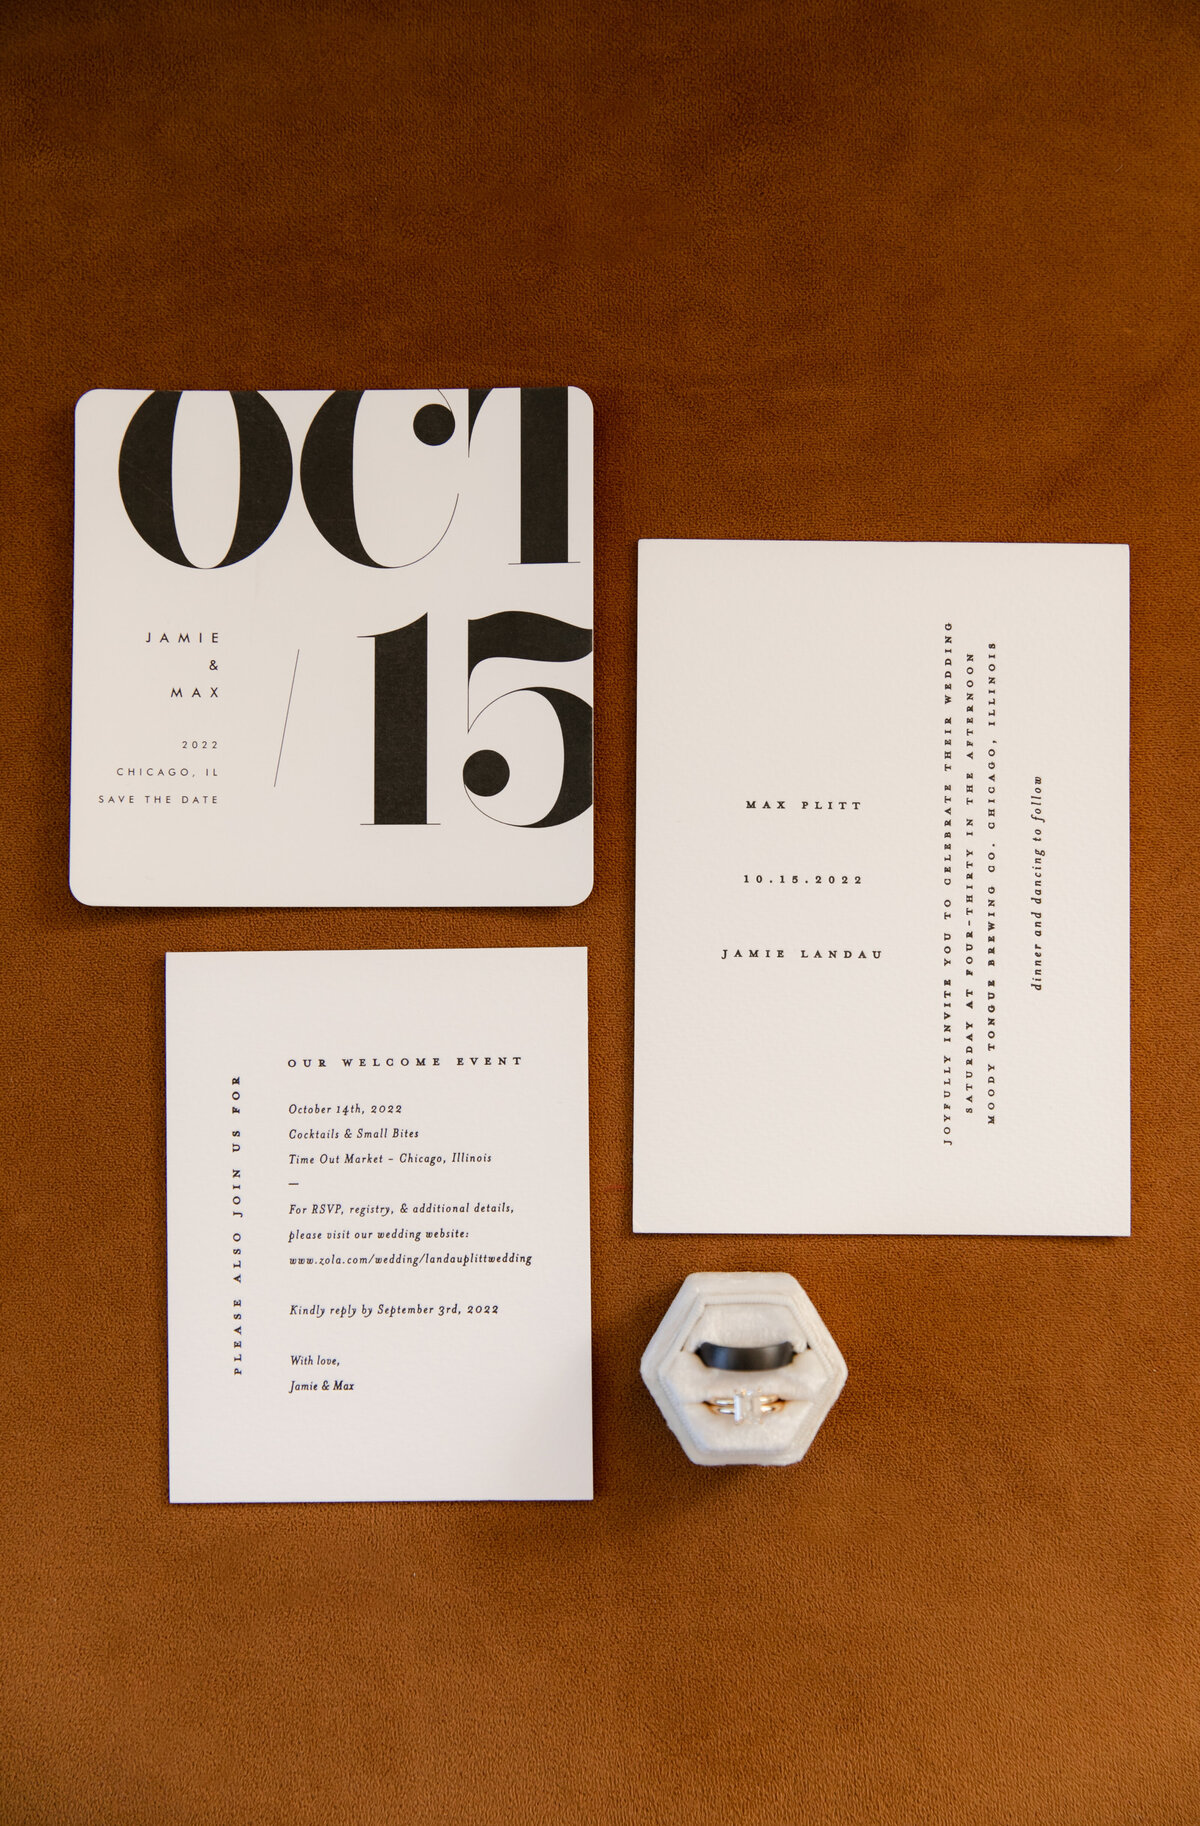 Flatlay displays simple black and white wedding invitations and wedding bands.